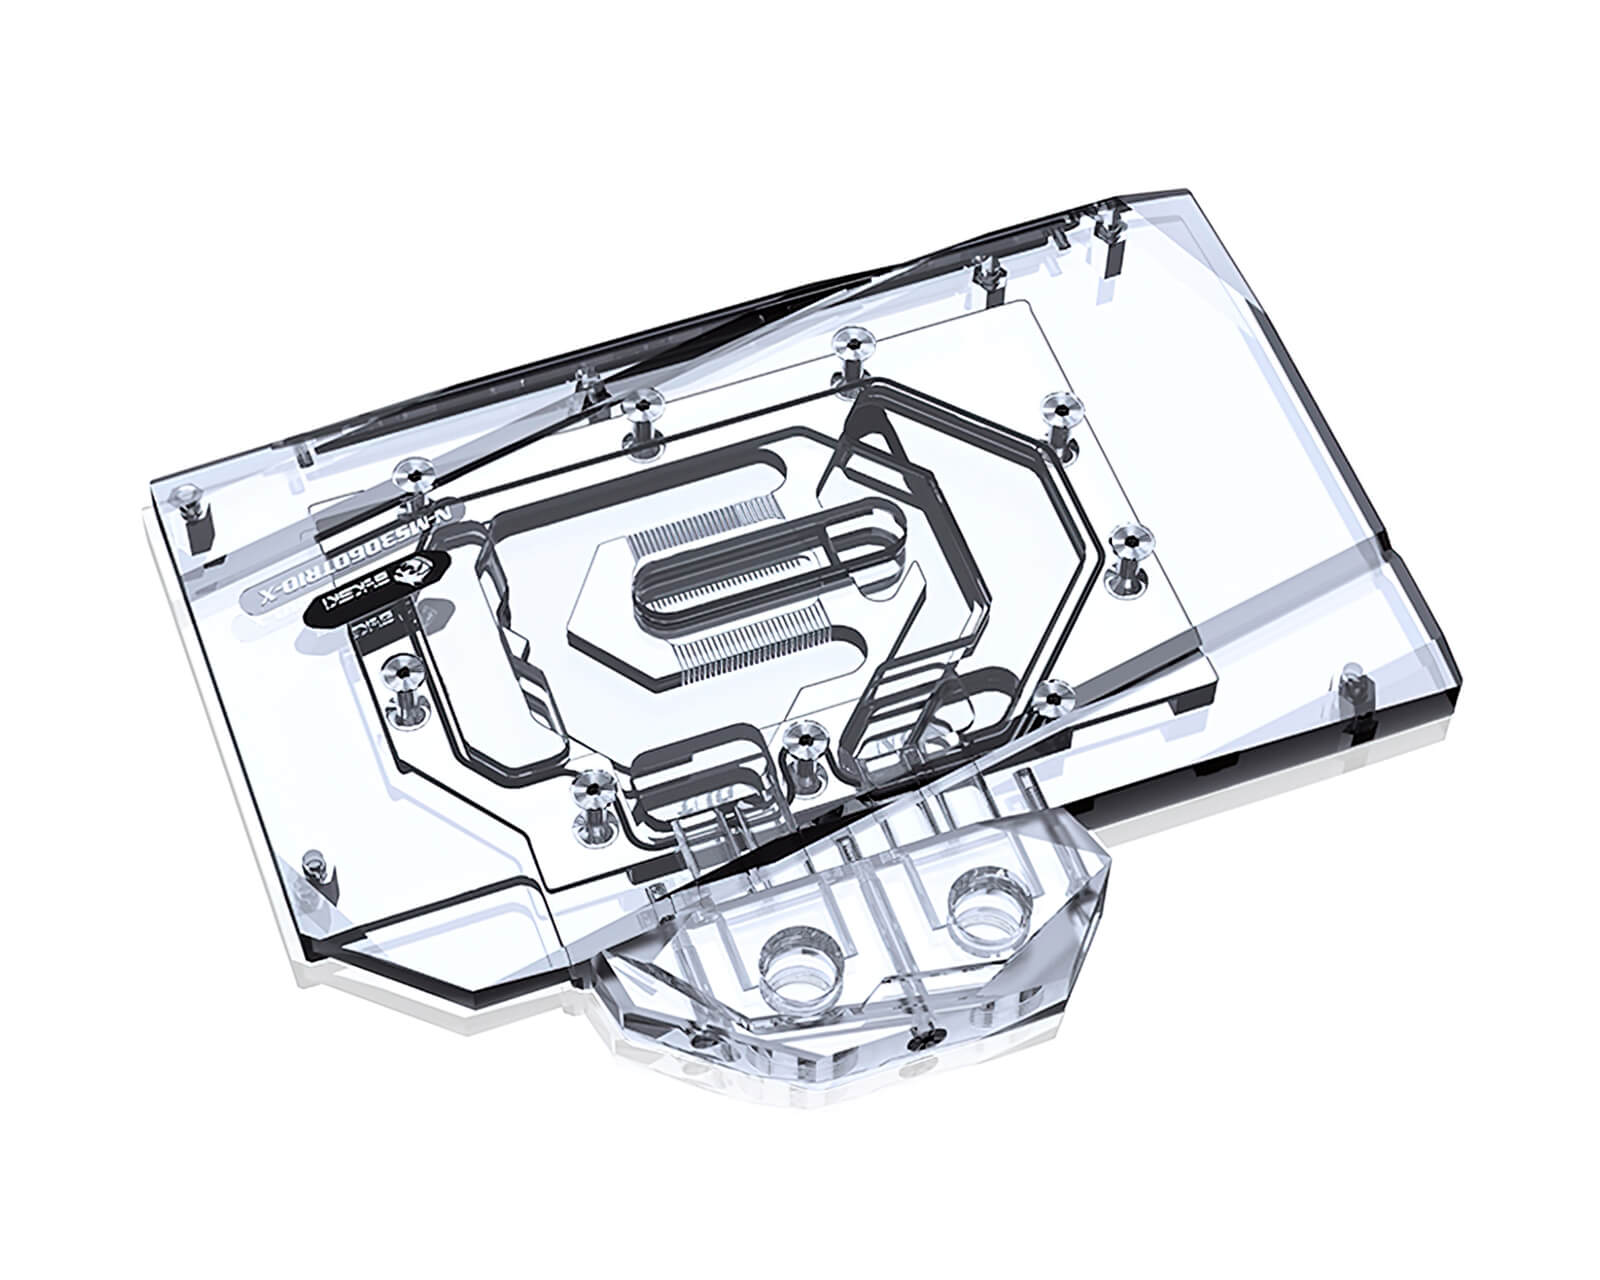 Bykski Full Coverage GPU Water Block and Backplate for MSI RTX 3060 Gaming X TRIO 2X (N-MS3060TRIO-X) - PrimoChill - KEEPING IT COOL